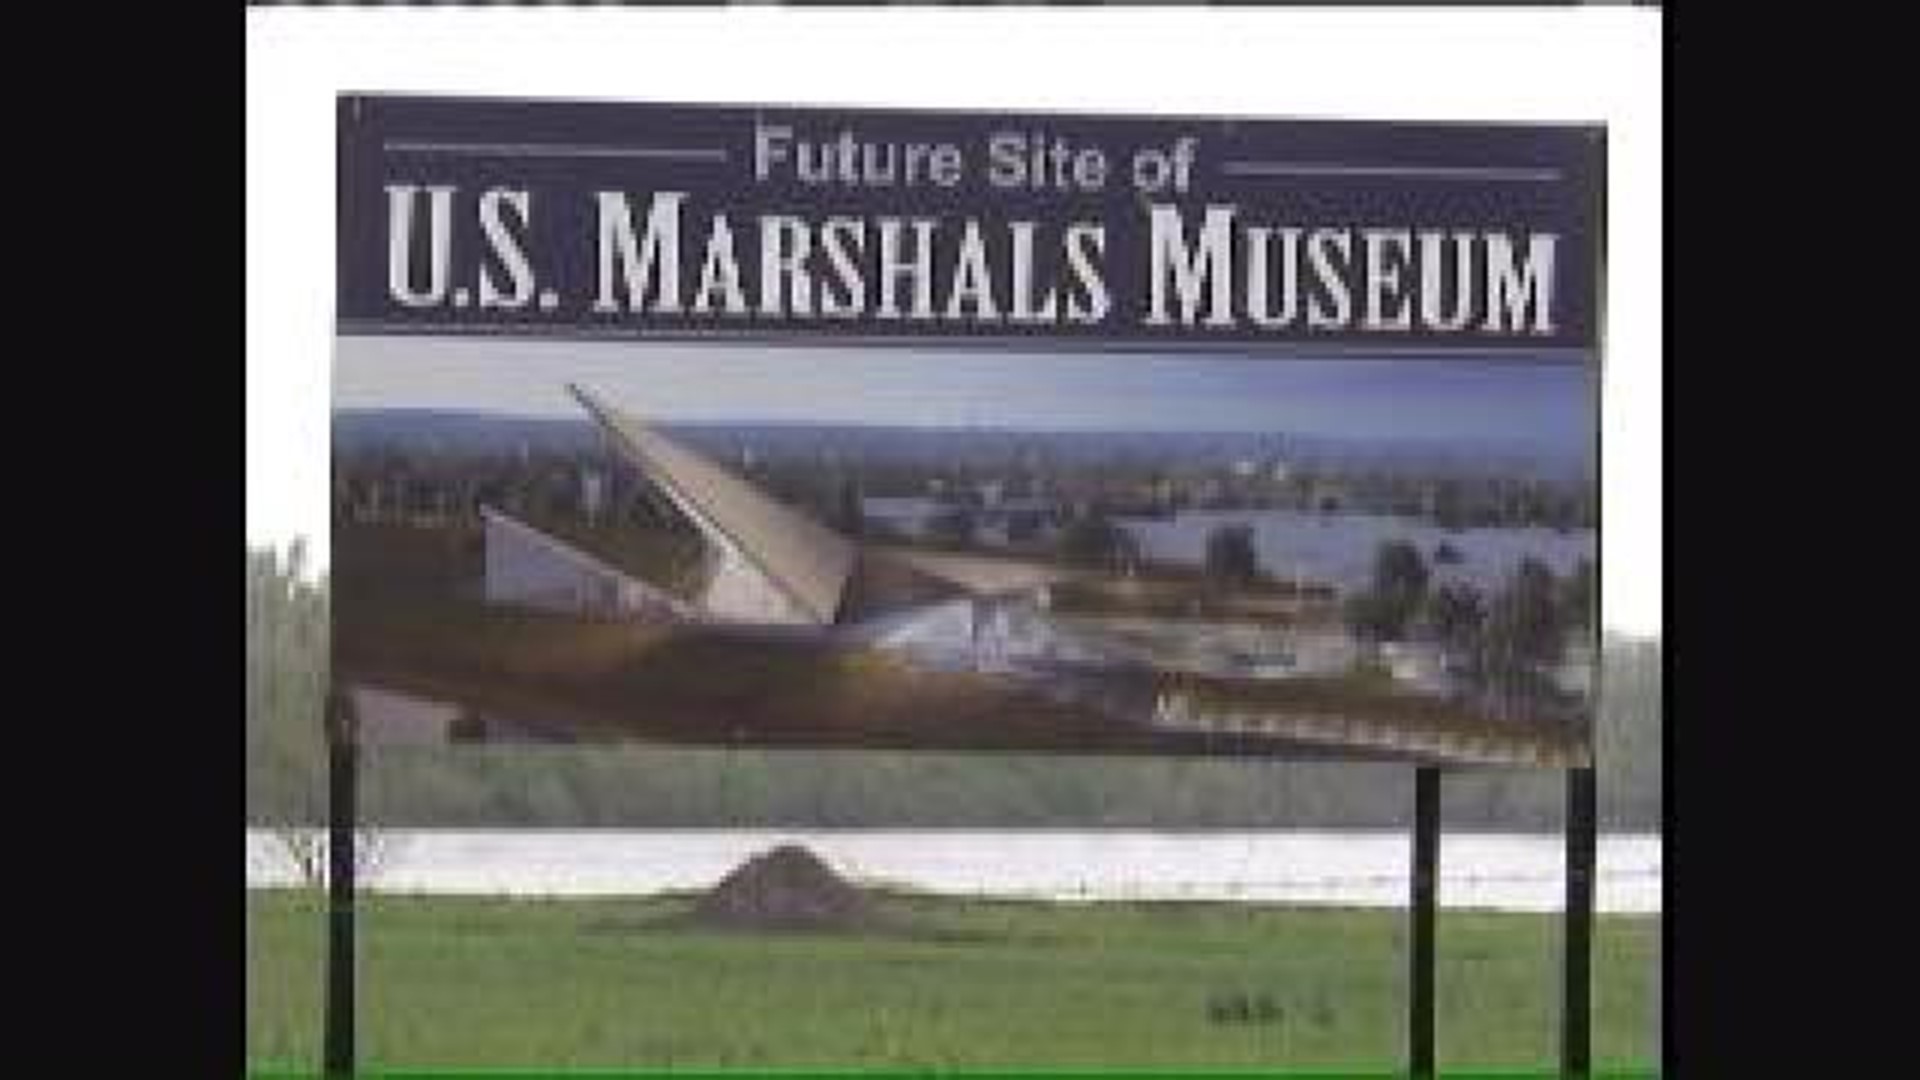 U.S. Marshals Coin to Help Museum